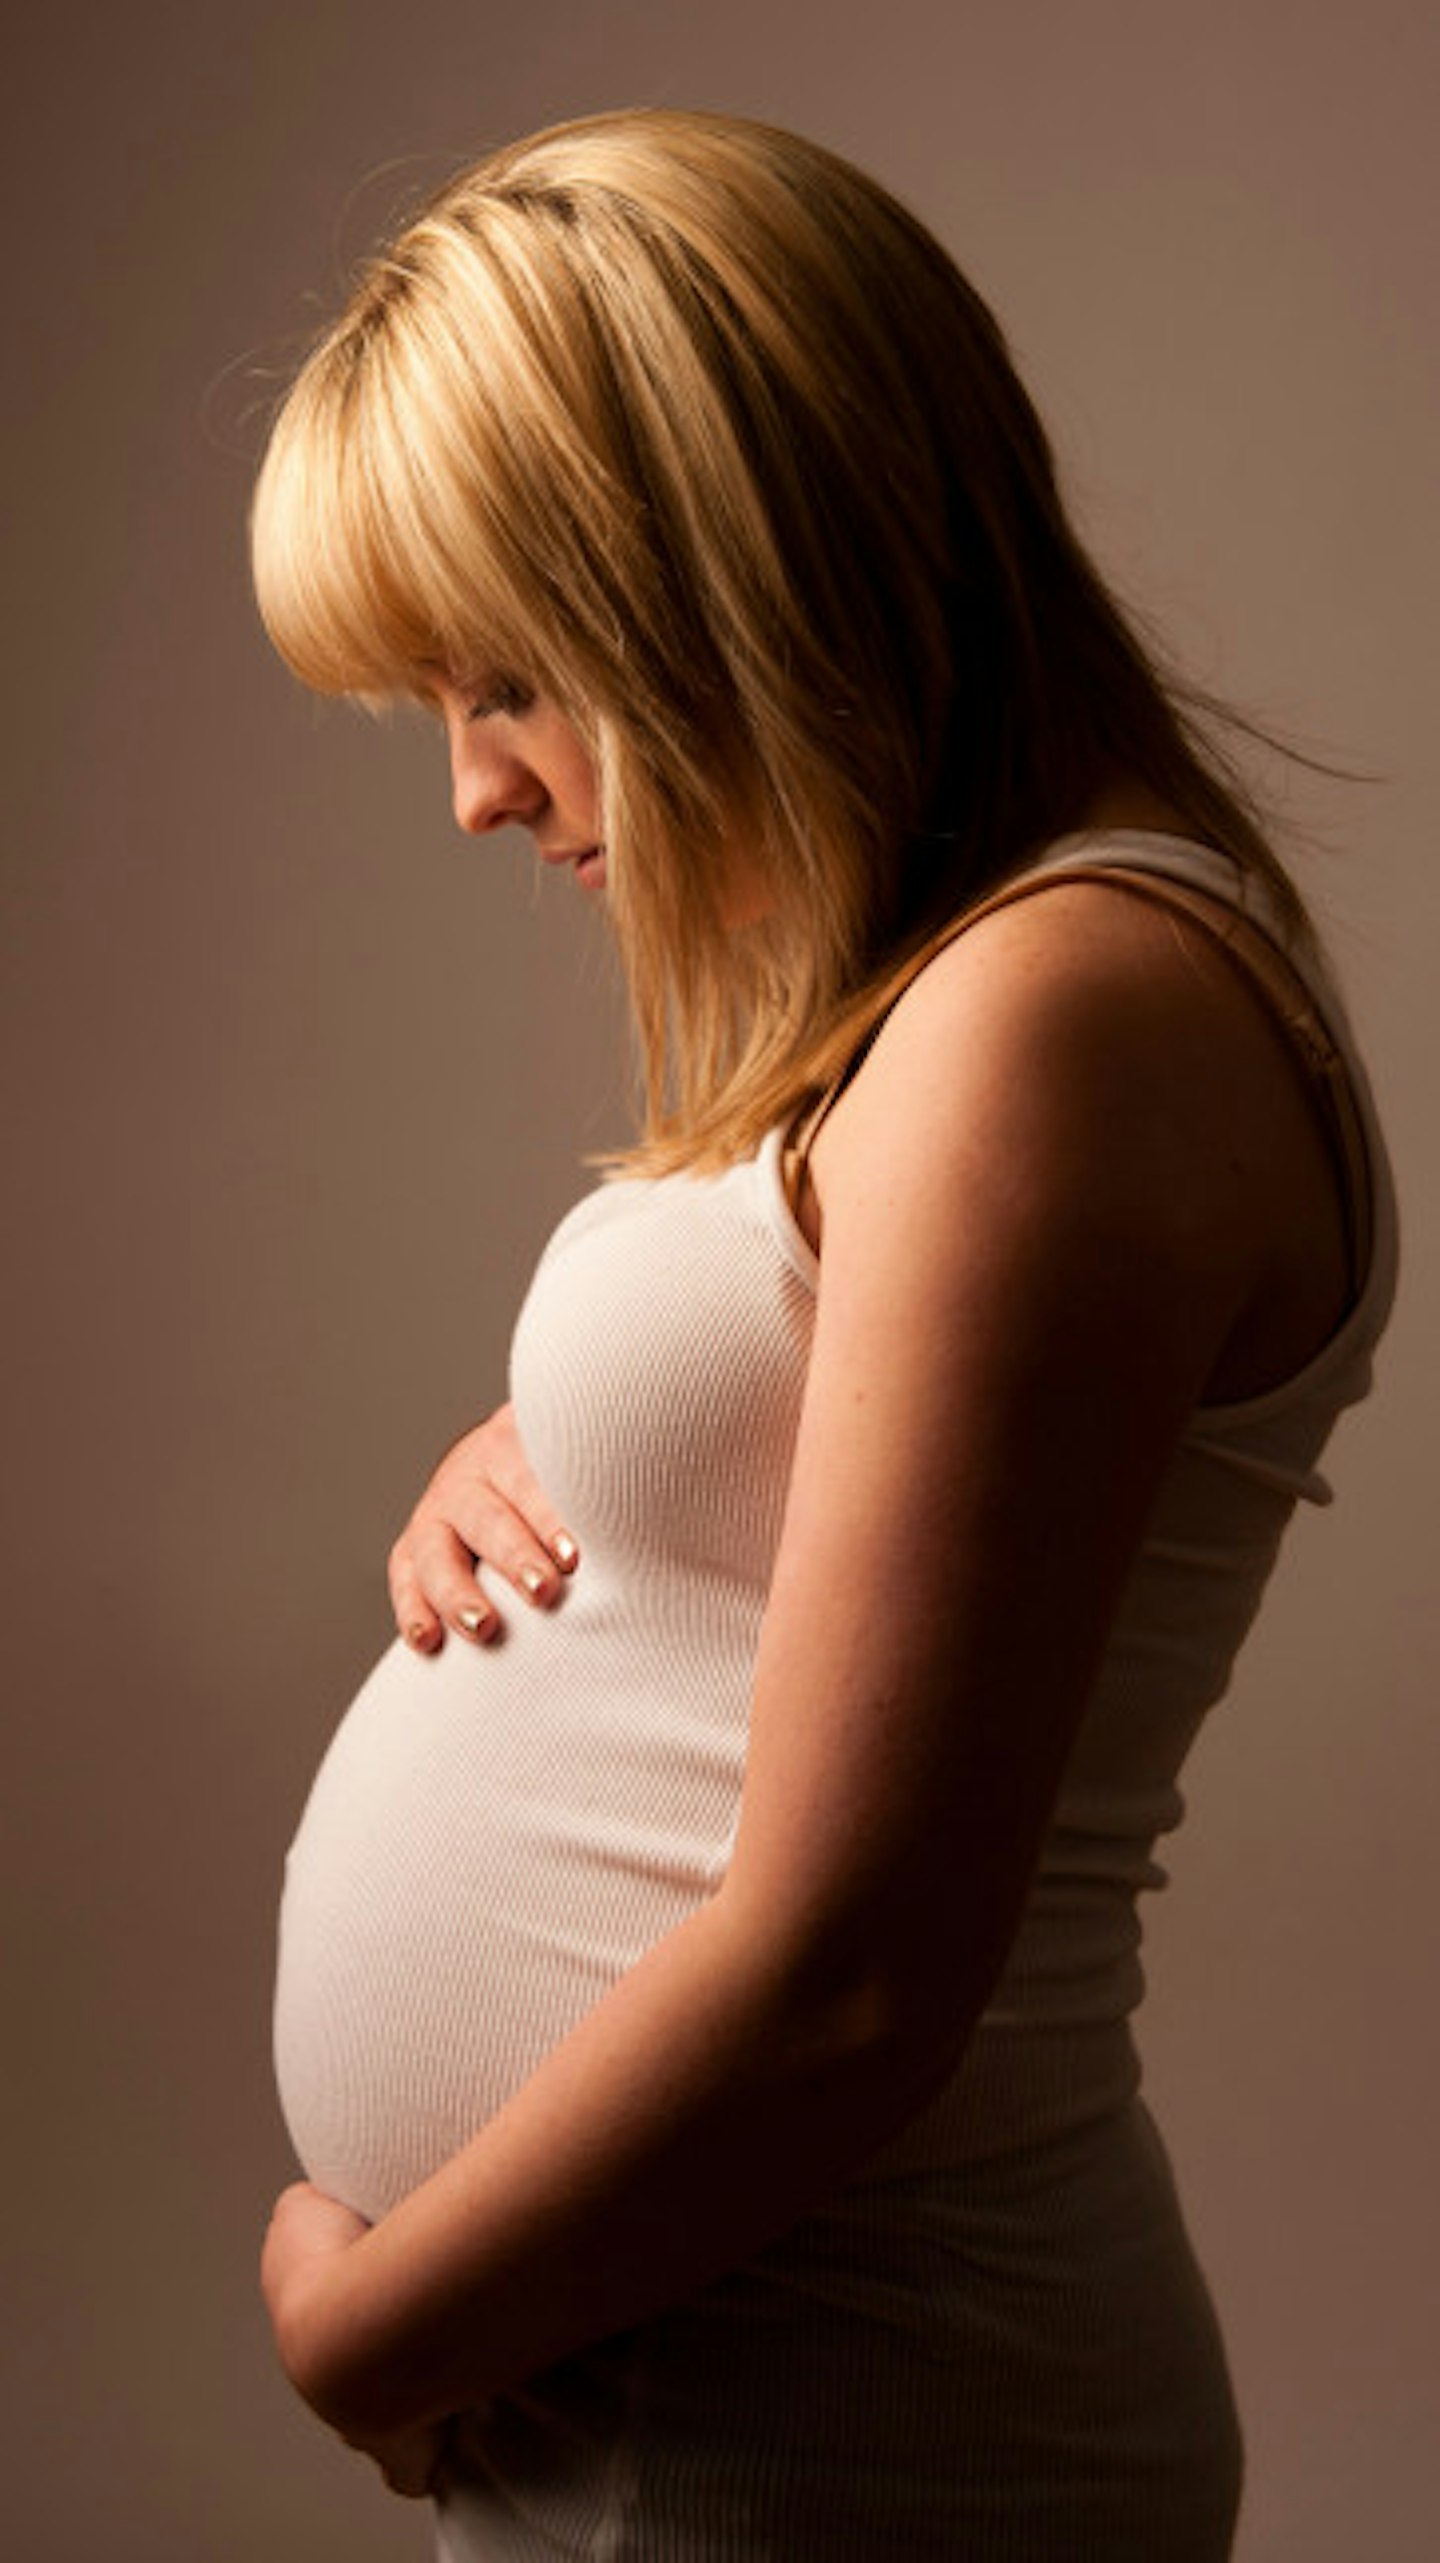 Social services have expressed 'concern' for the unborn child (stock images)